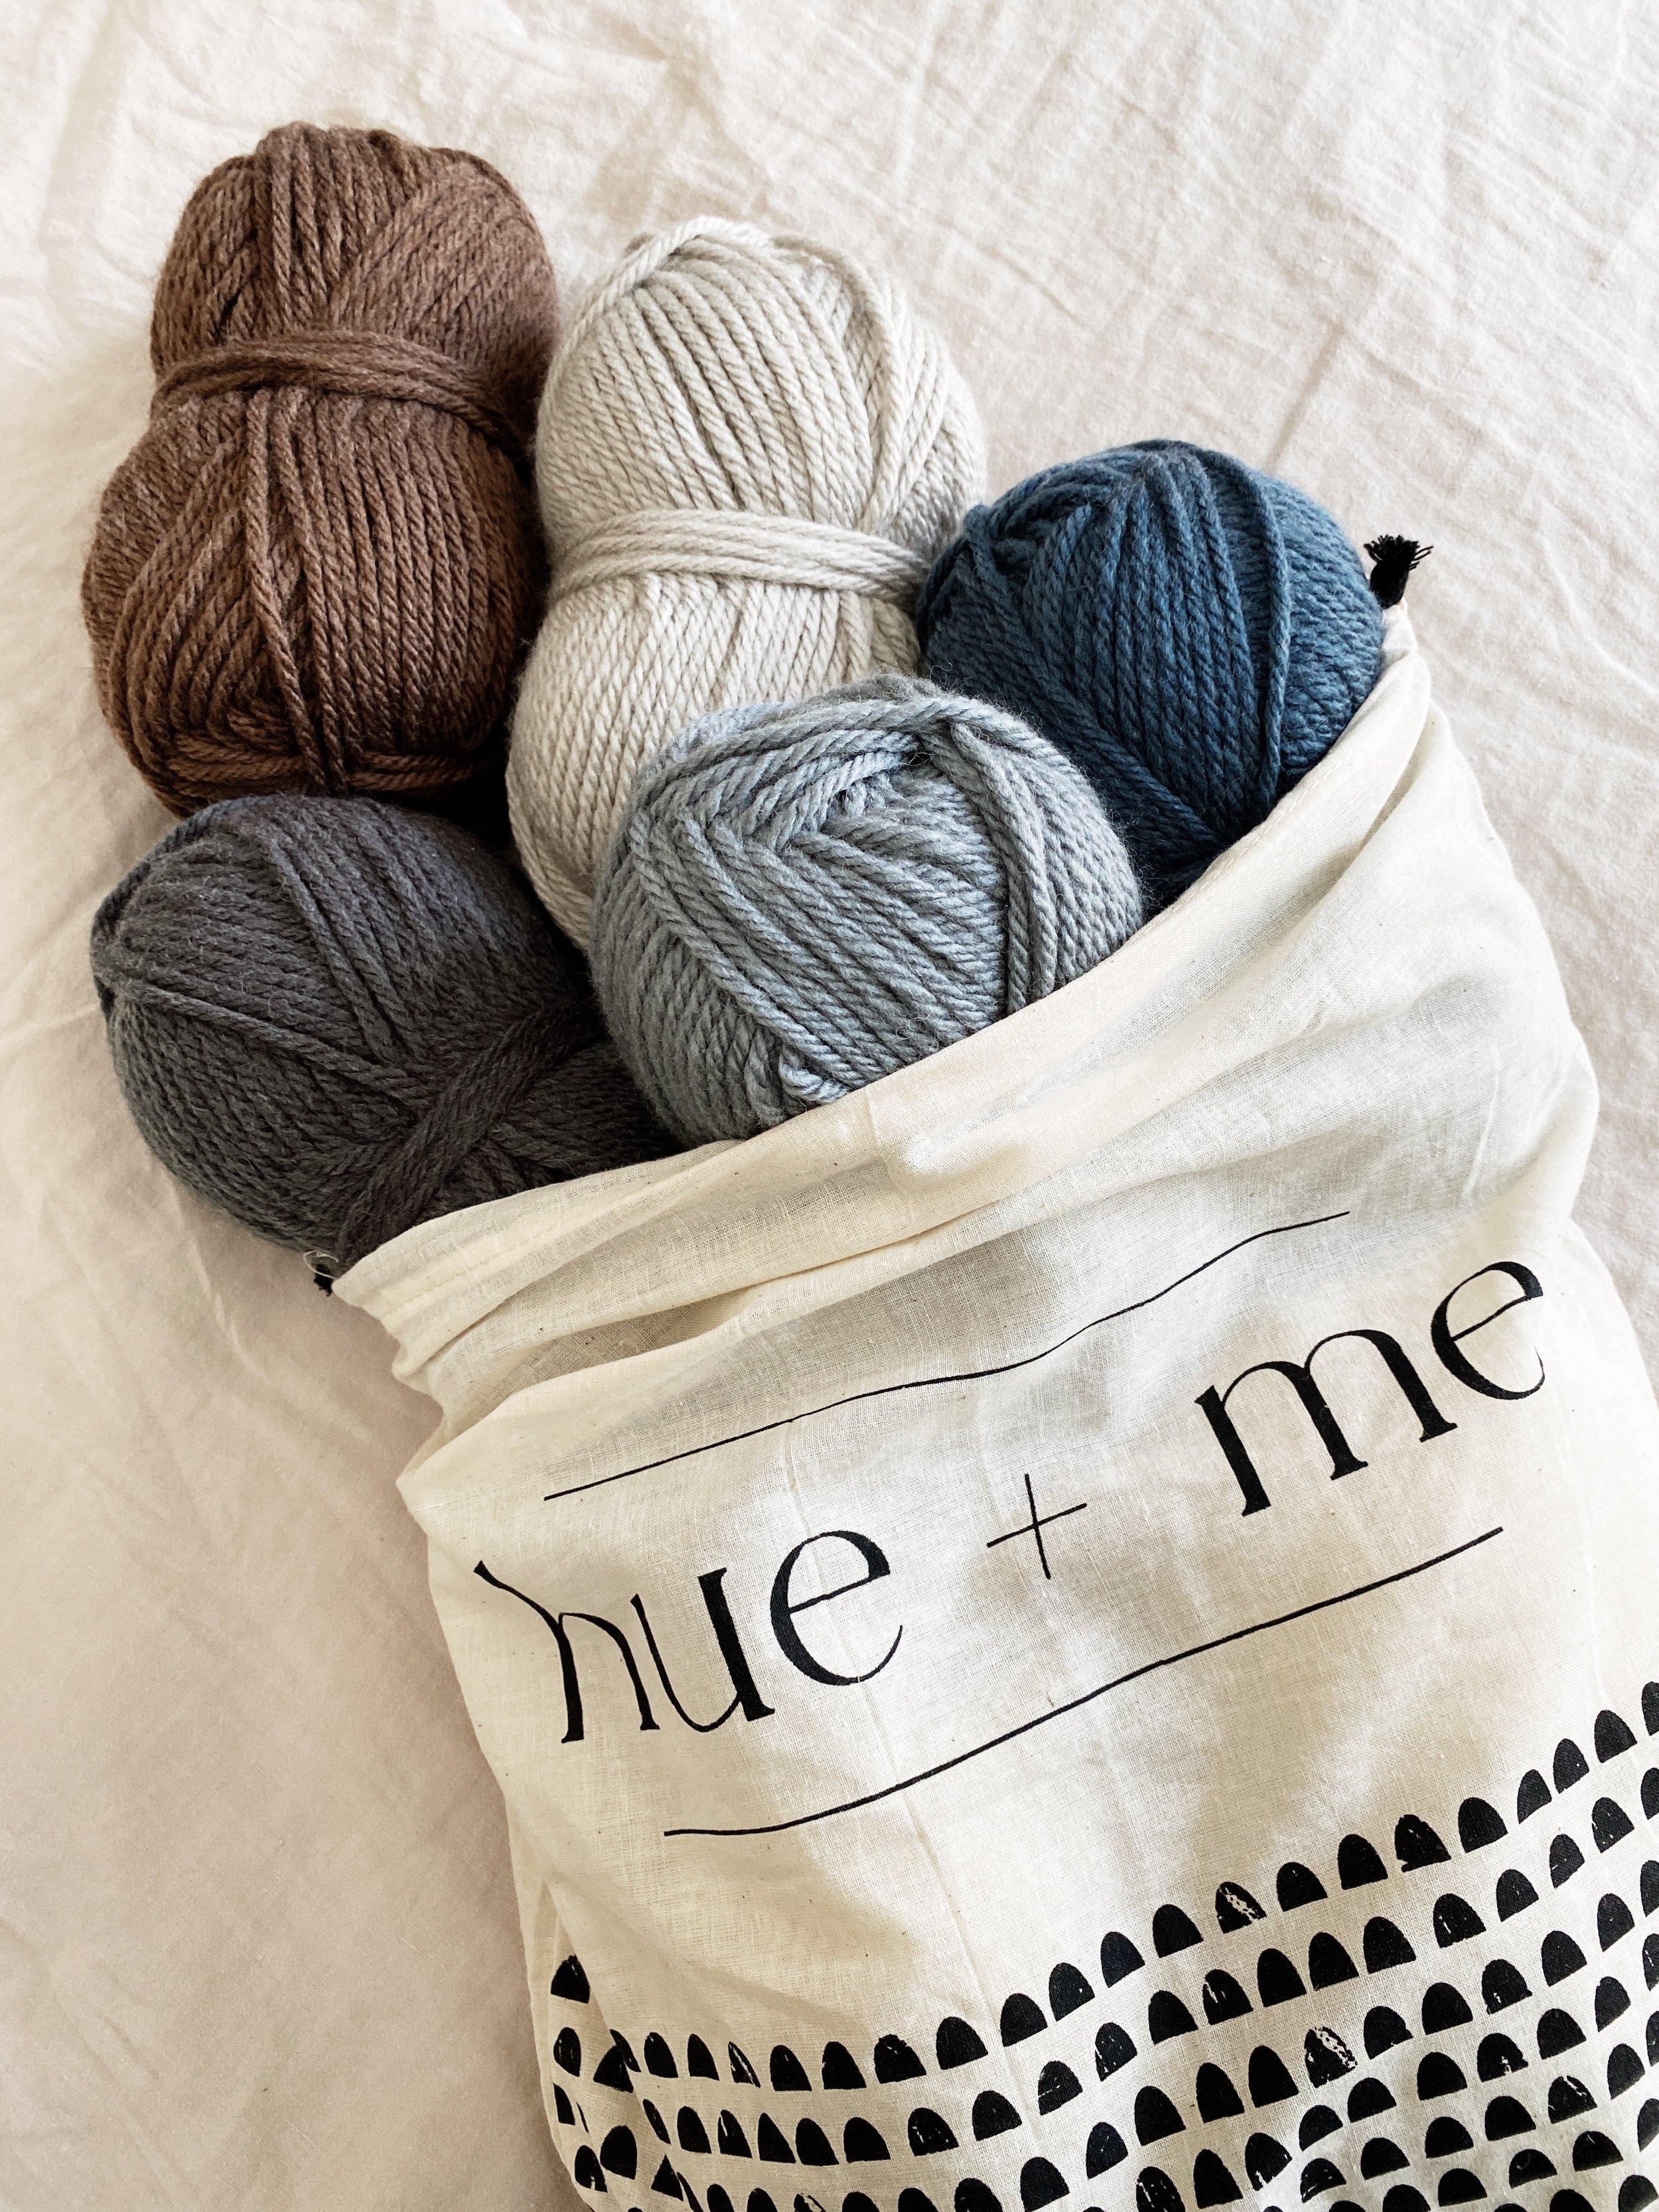 Hue + Me Sale and Project Bag